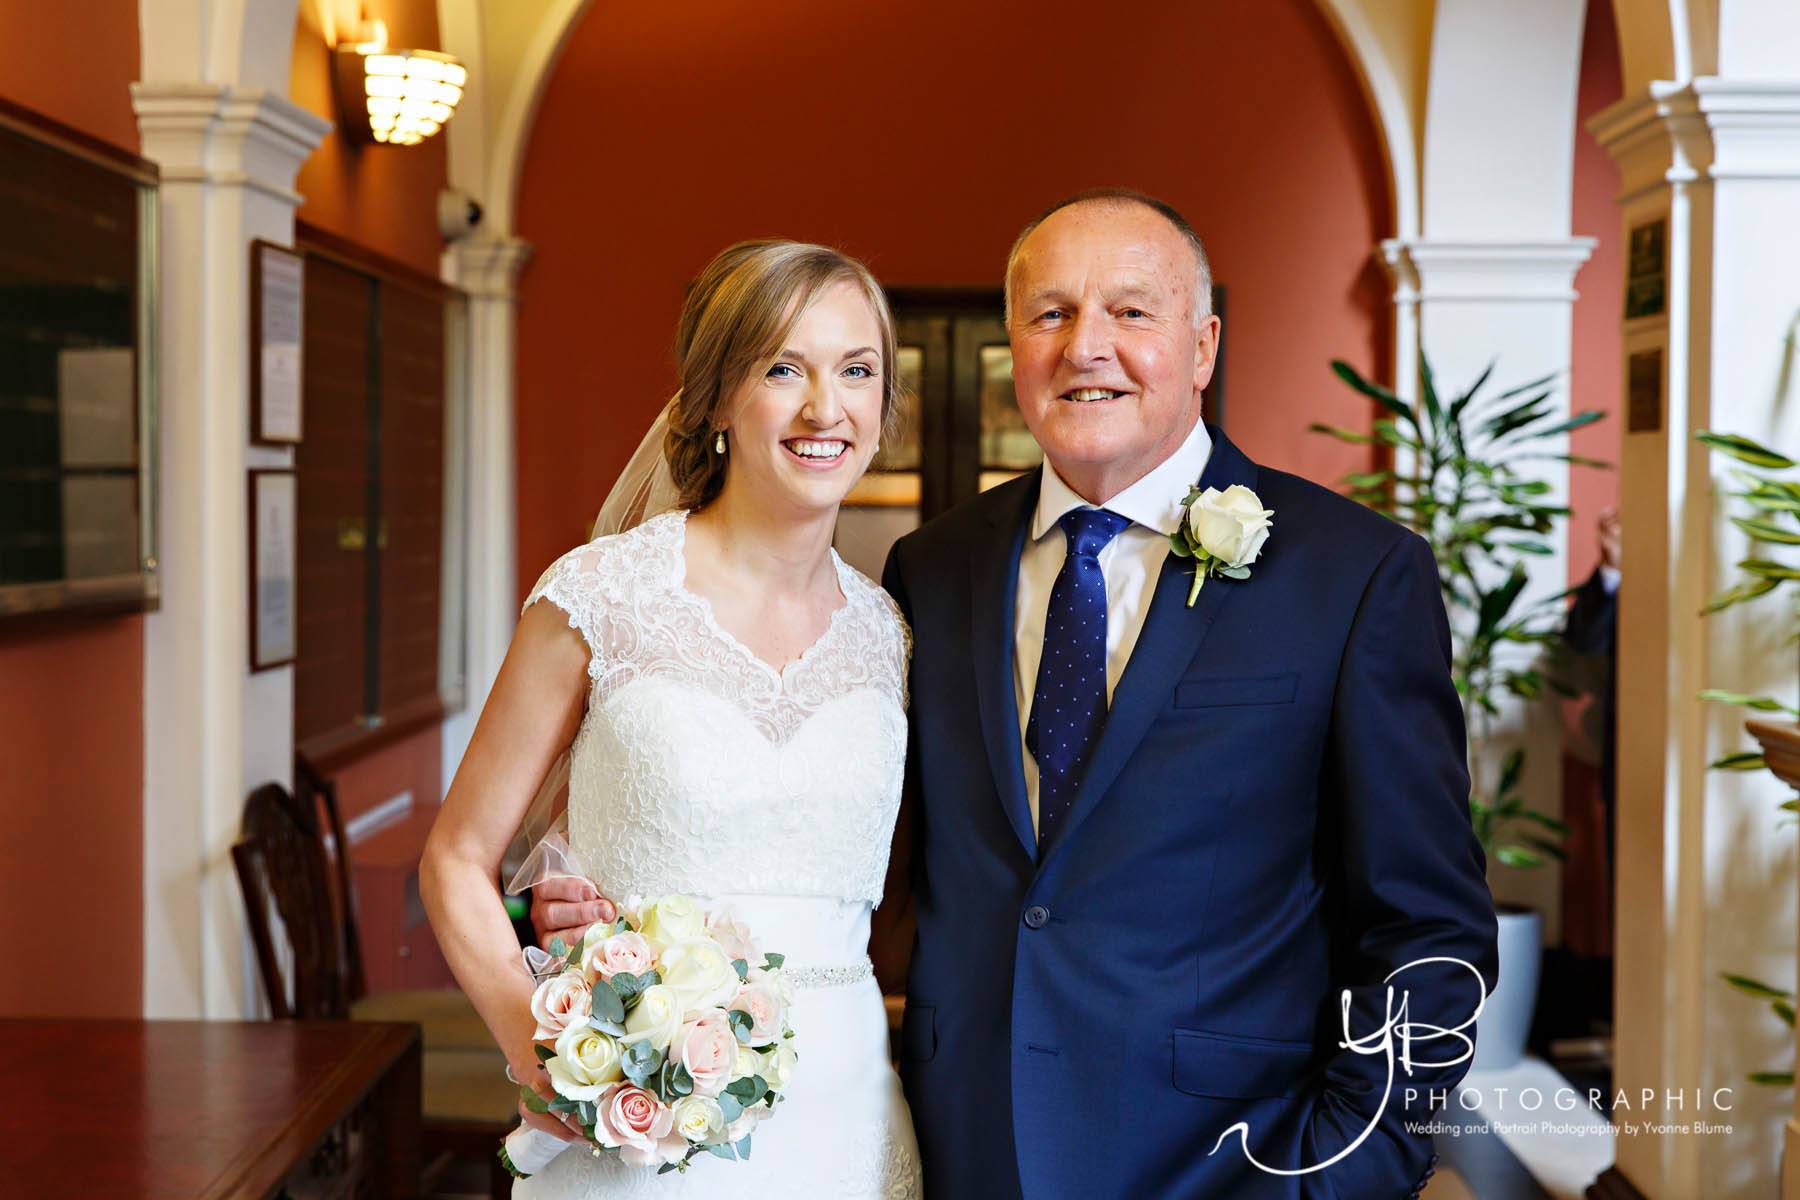 Portrait of the bride and father of the bride